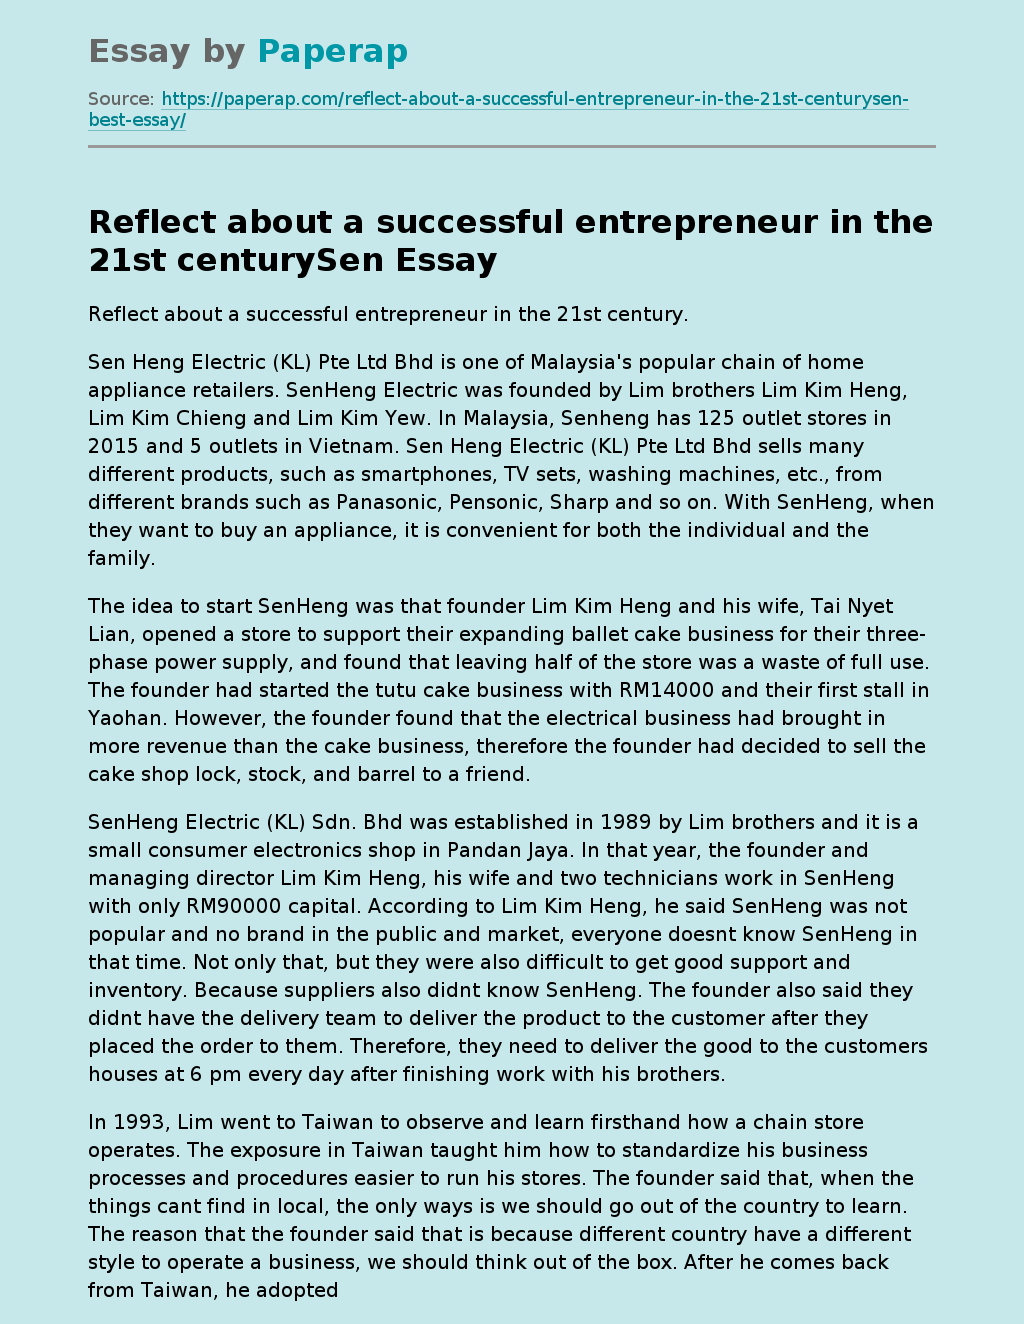 Reflect about a successful entrepreneur in the 21st centurySen